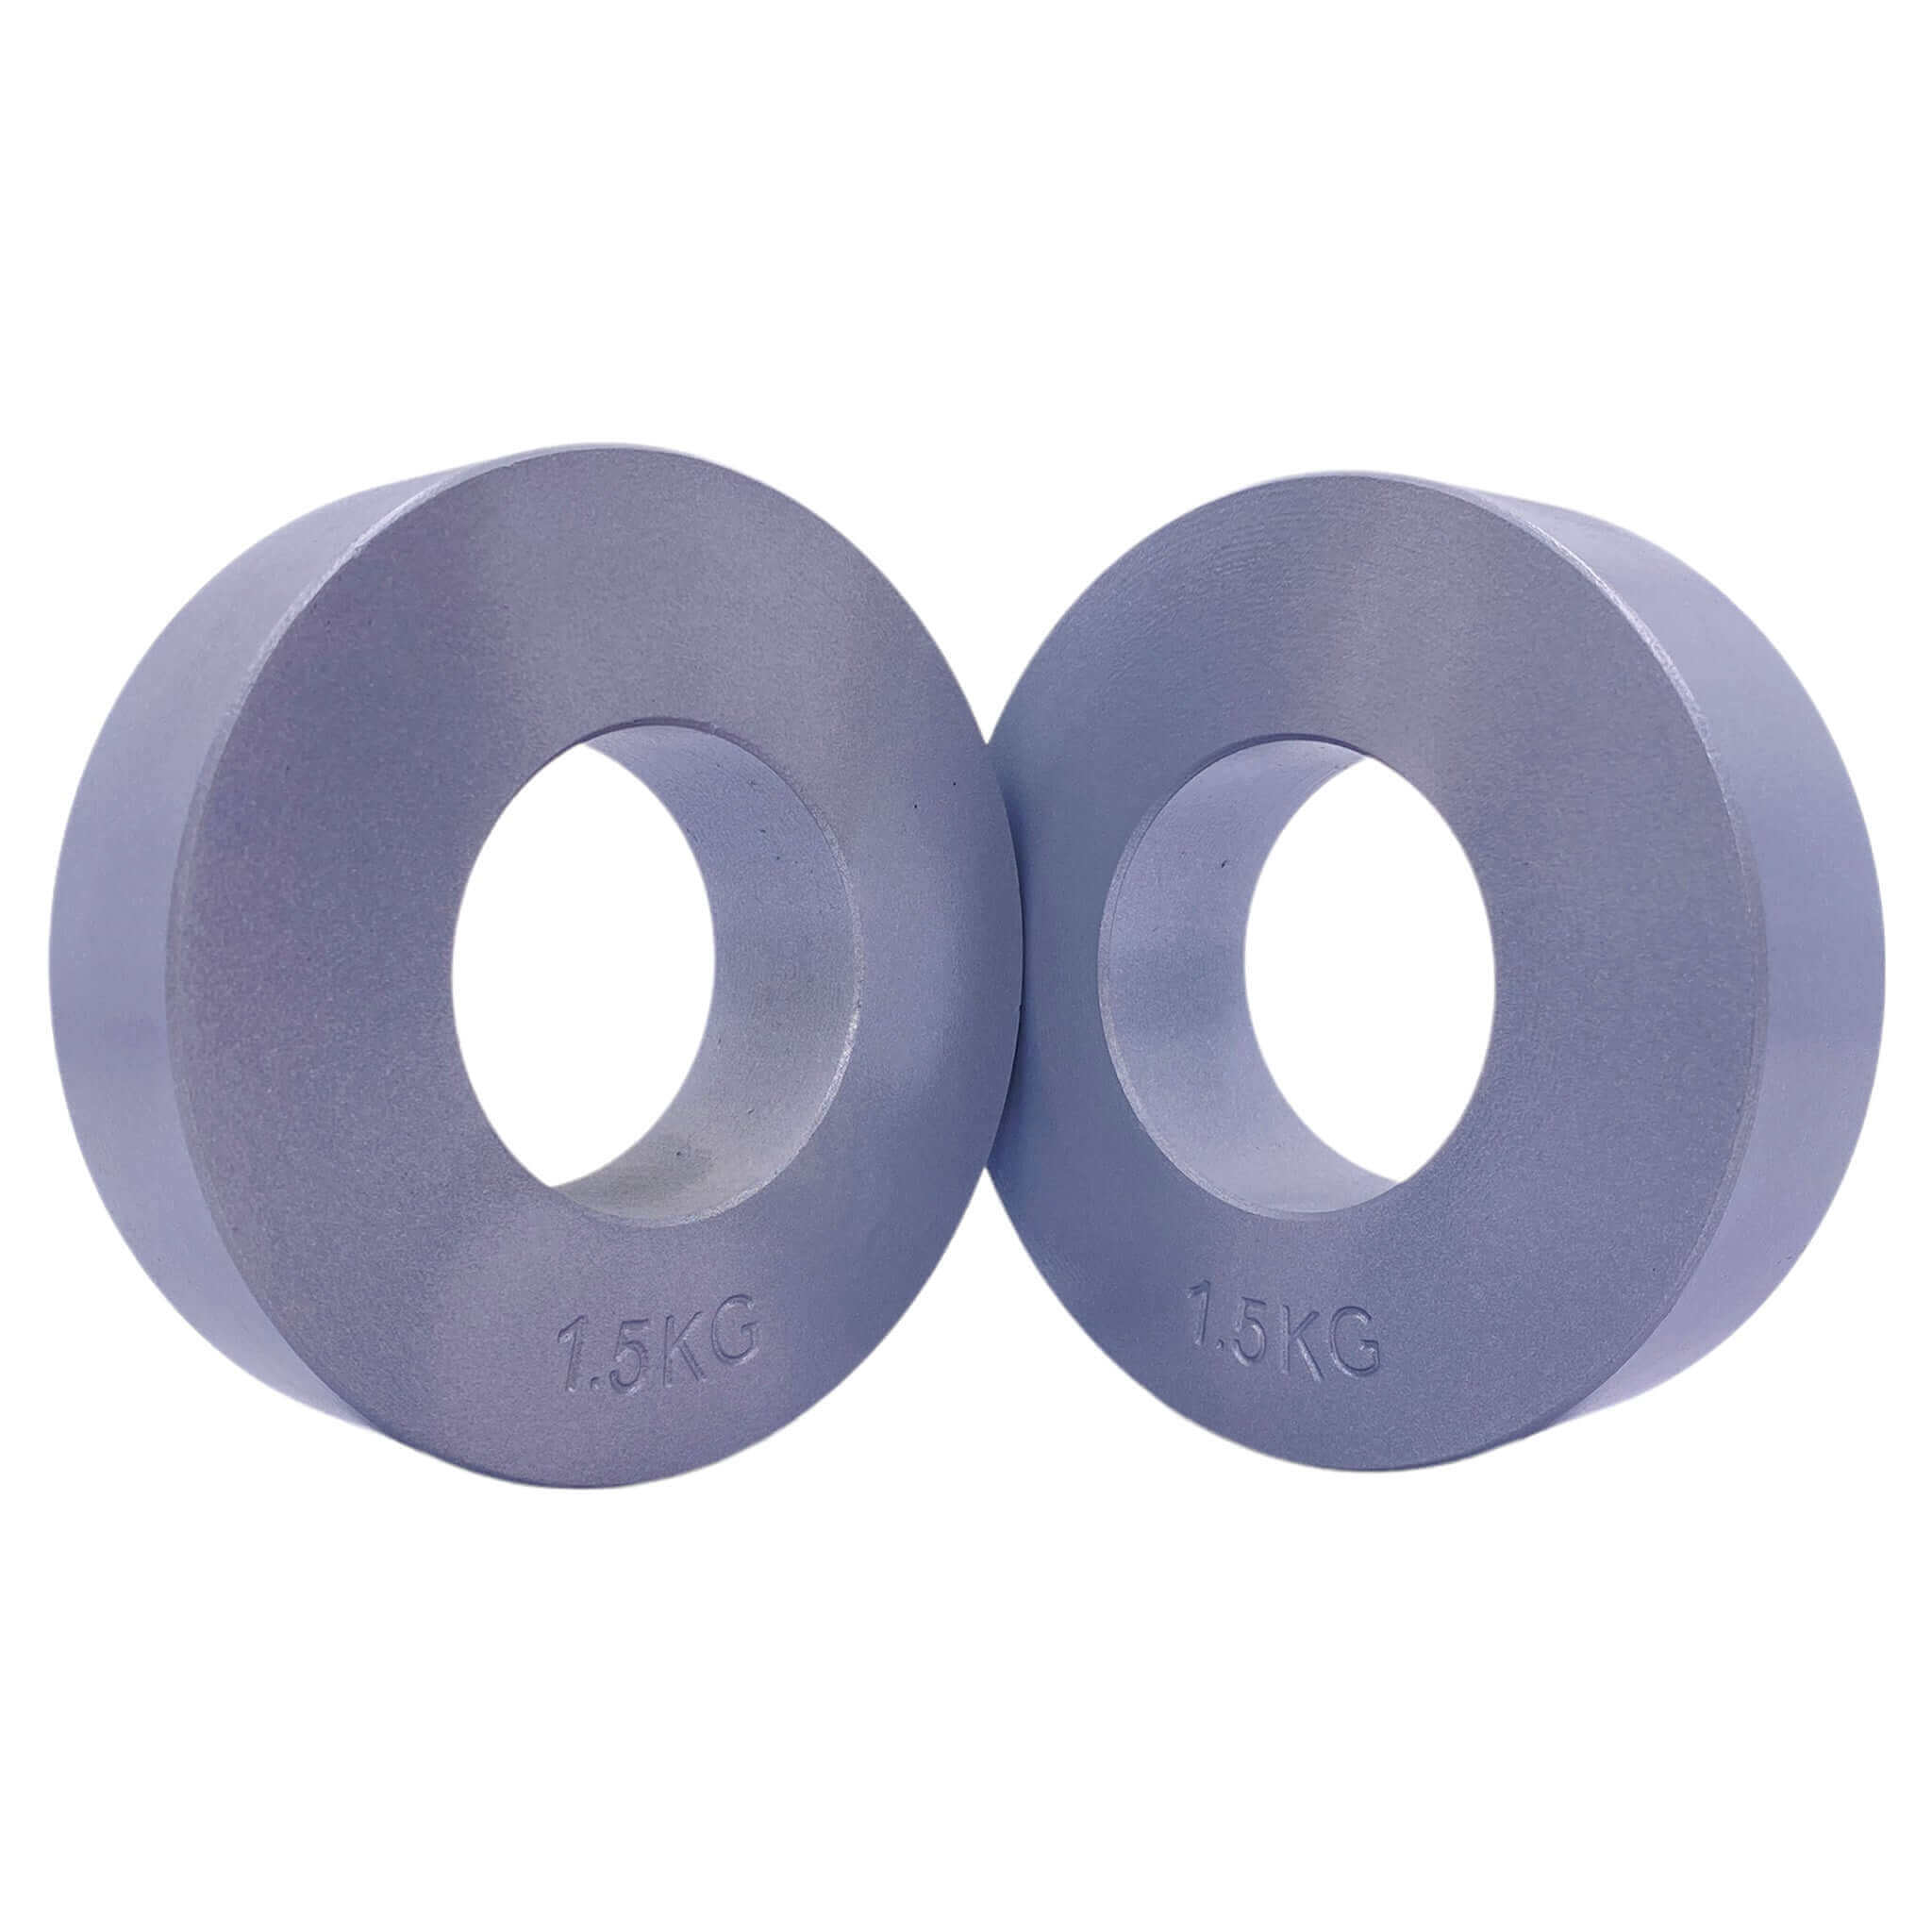 1.5kg Steel Fractional Plates Pair | INSOURCE